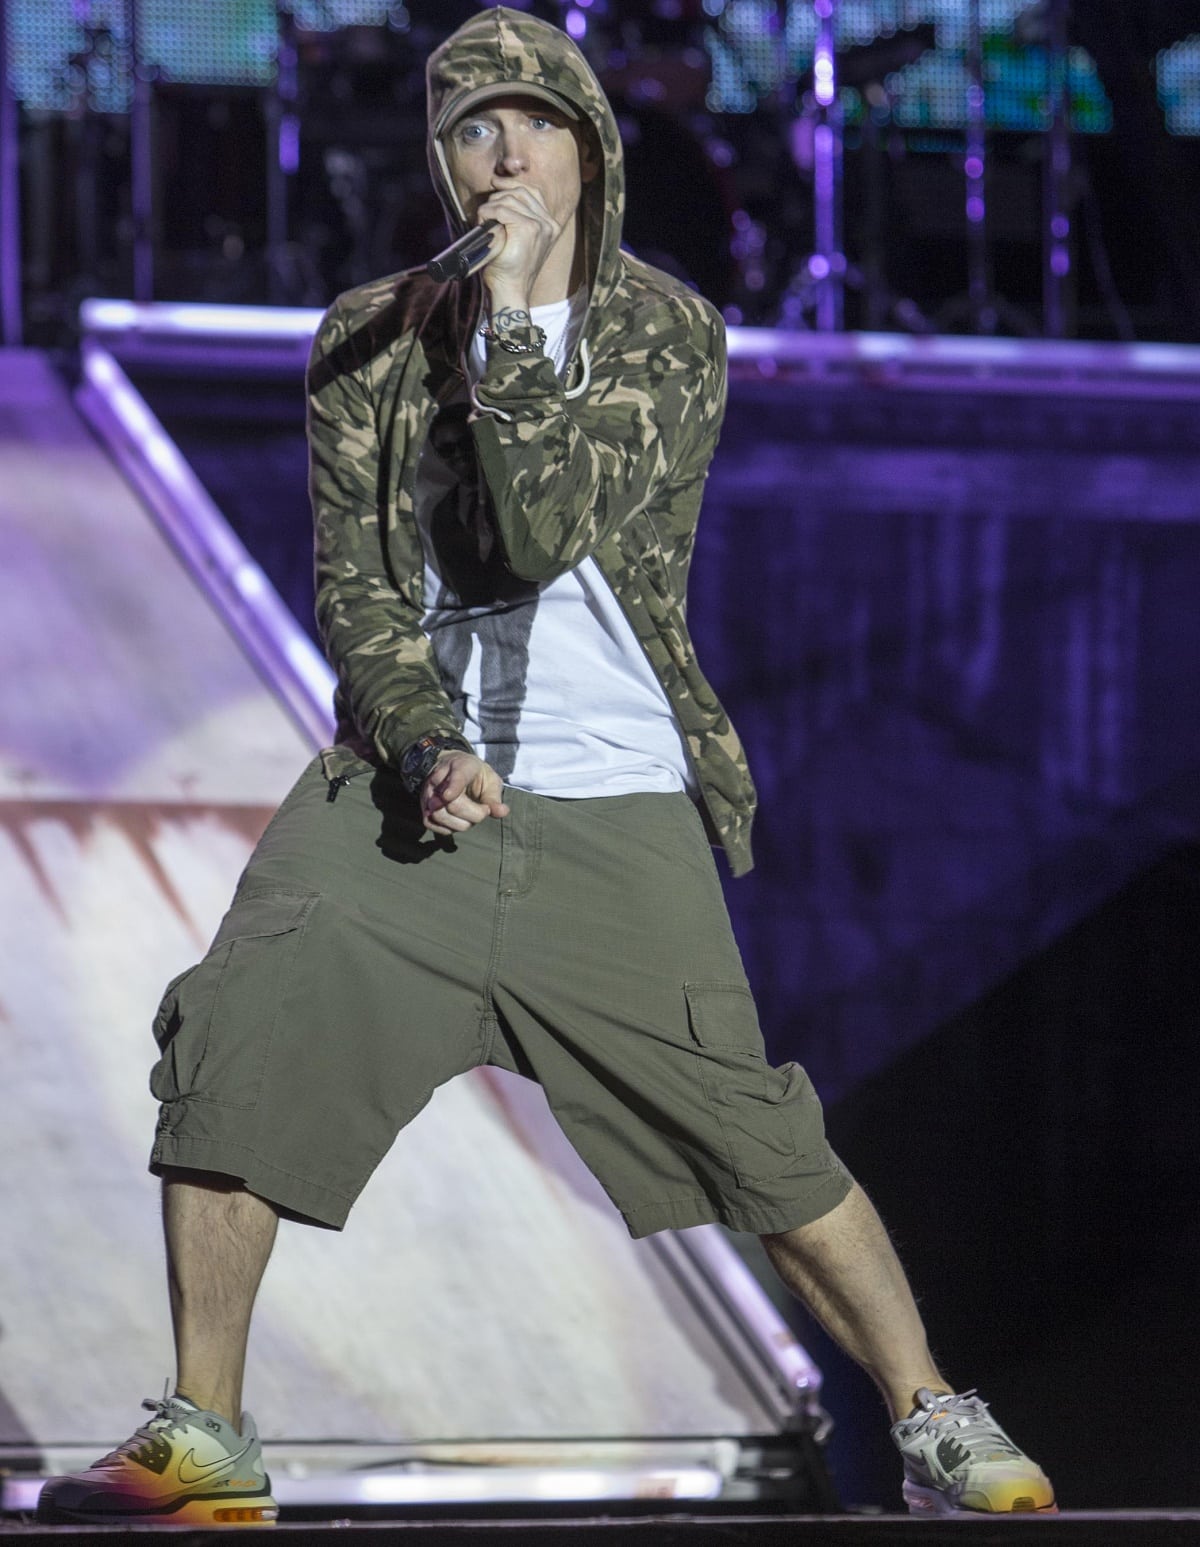 Performing at the 2013 Reading and Leeds Festival, Eminem shows off his larger-than-life presence on stage